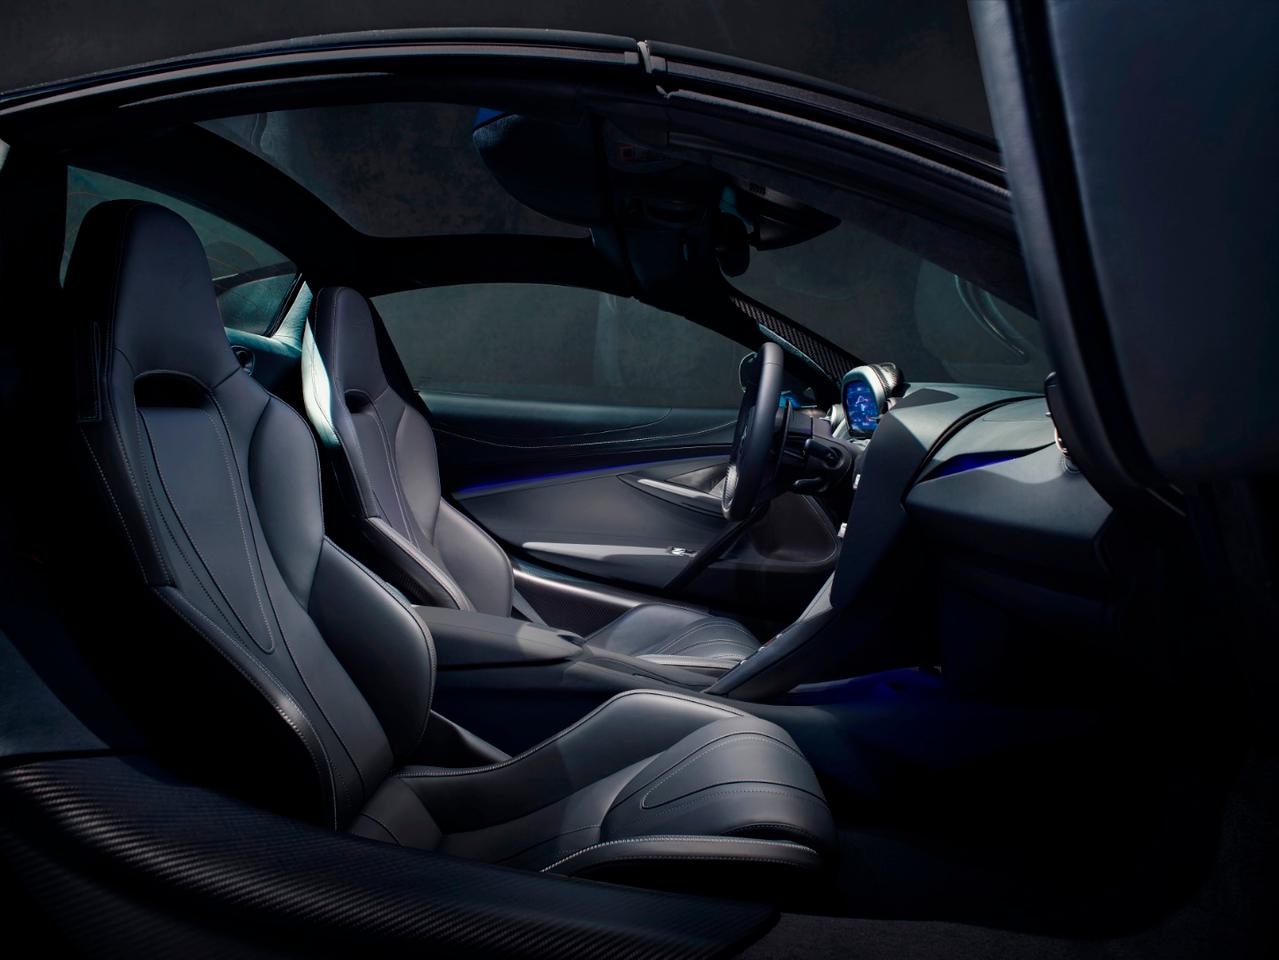 McLaren 720S Spider convertible: interior offers more over-the-shoulder visibility thanks to glass flying buttresses